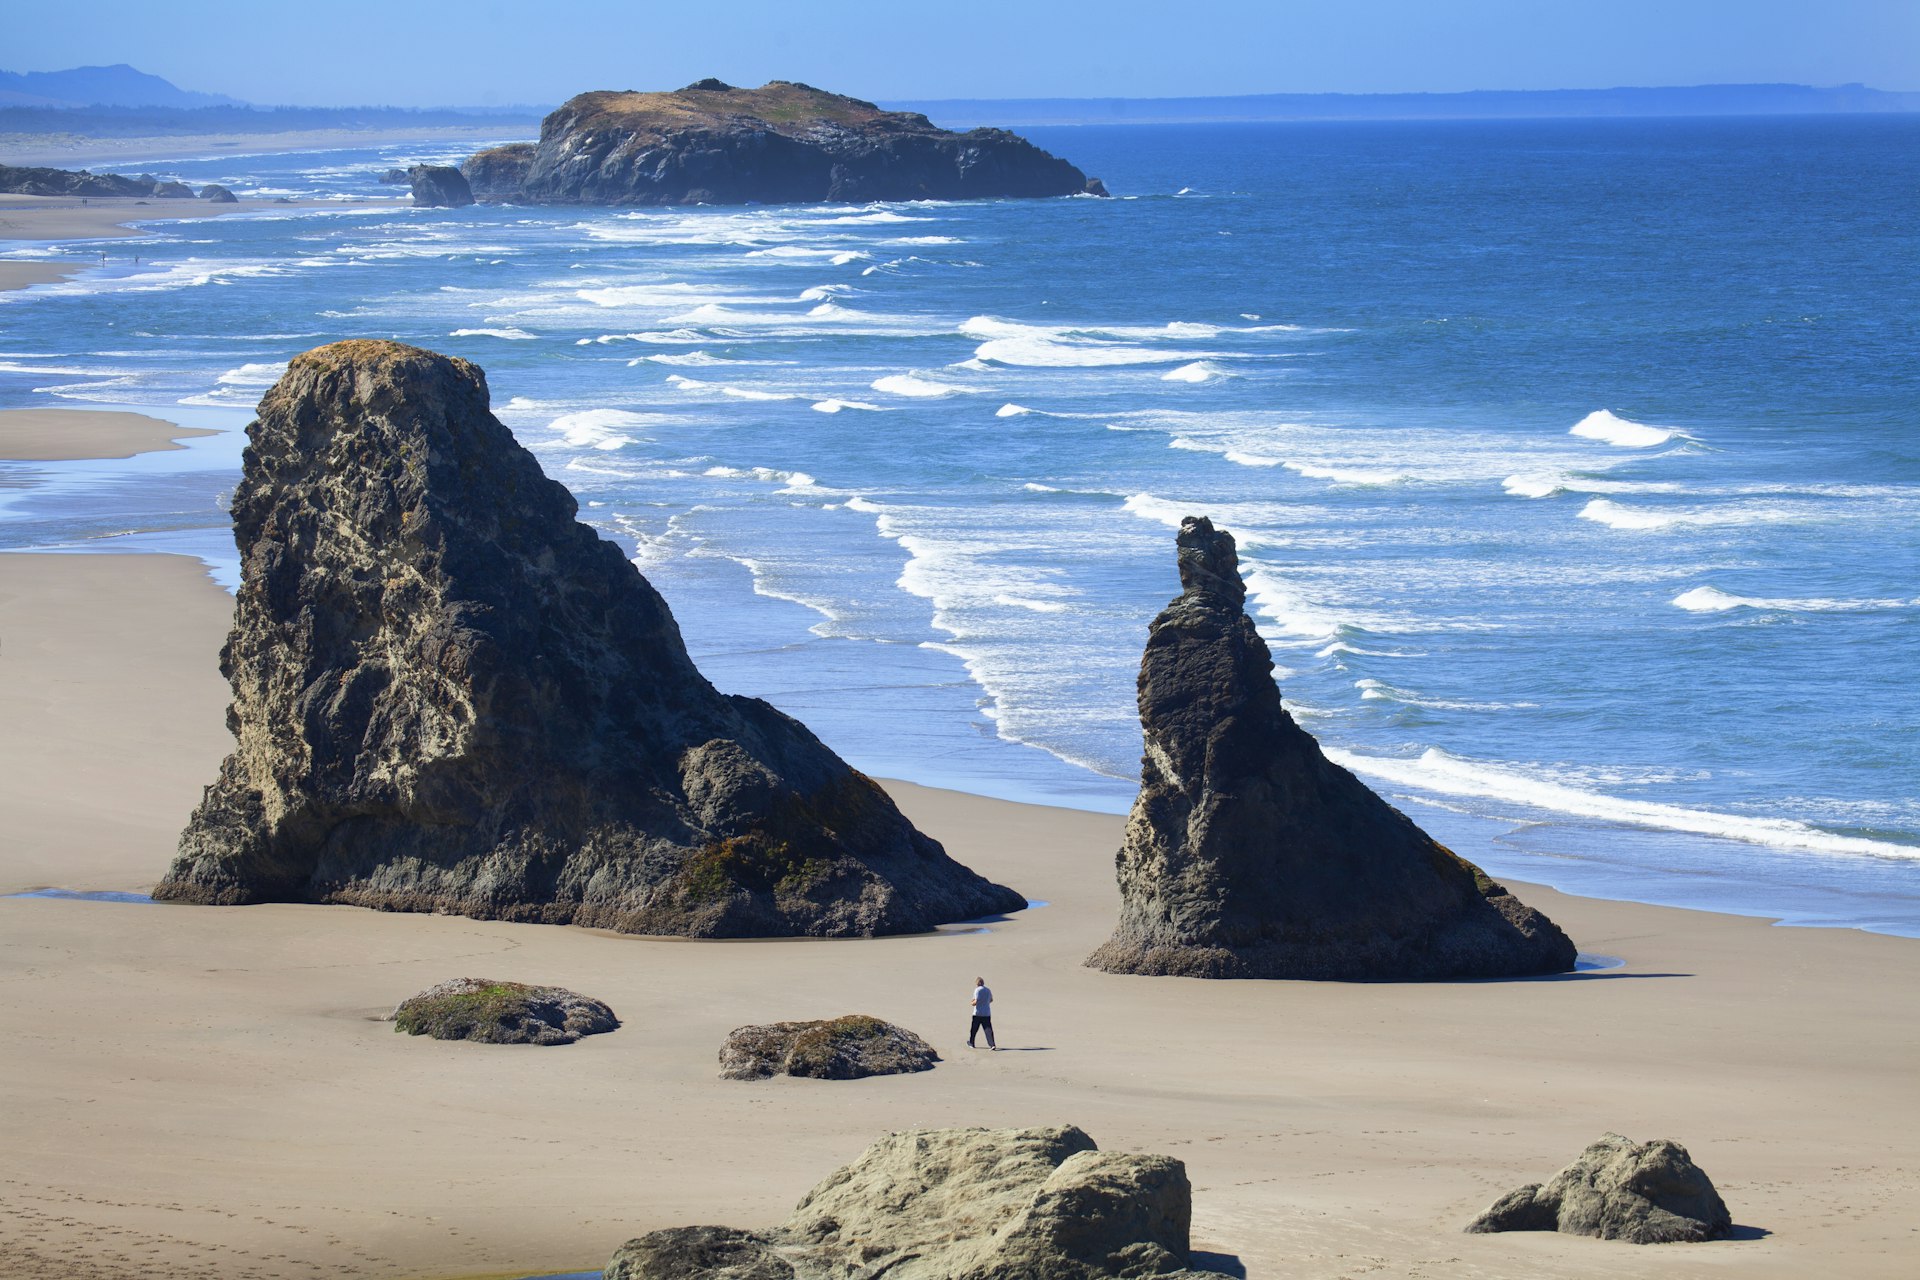 Empty beaches and rocky outcrops at Sonoma Coast State Park